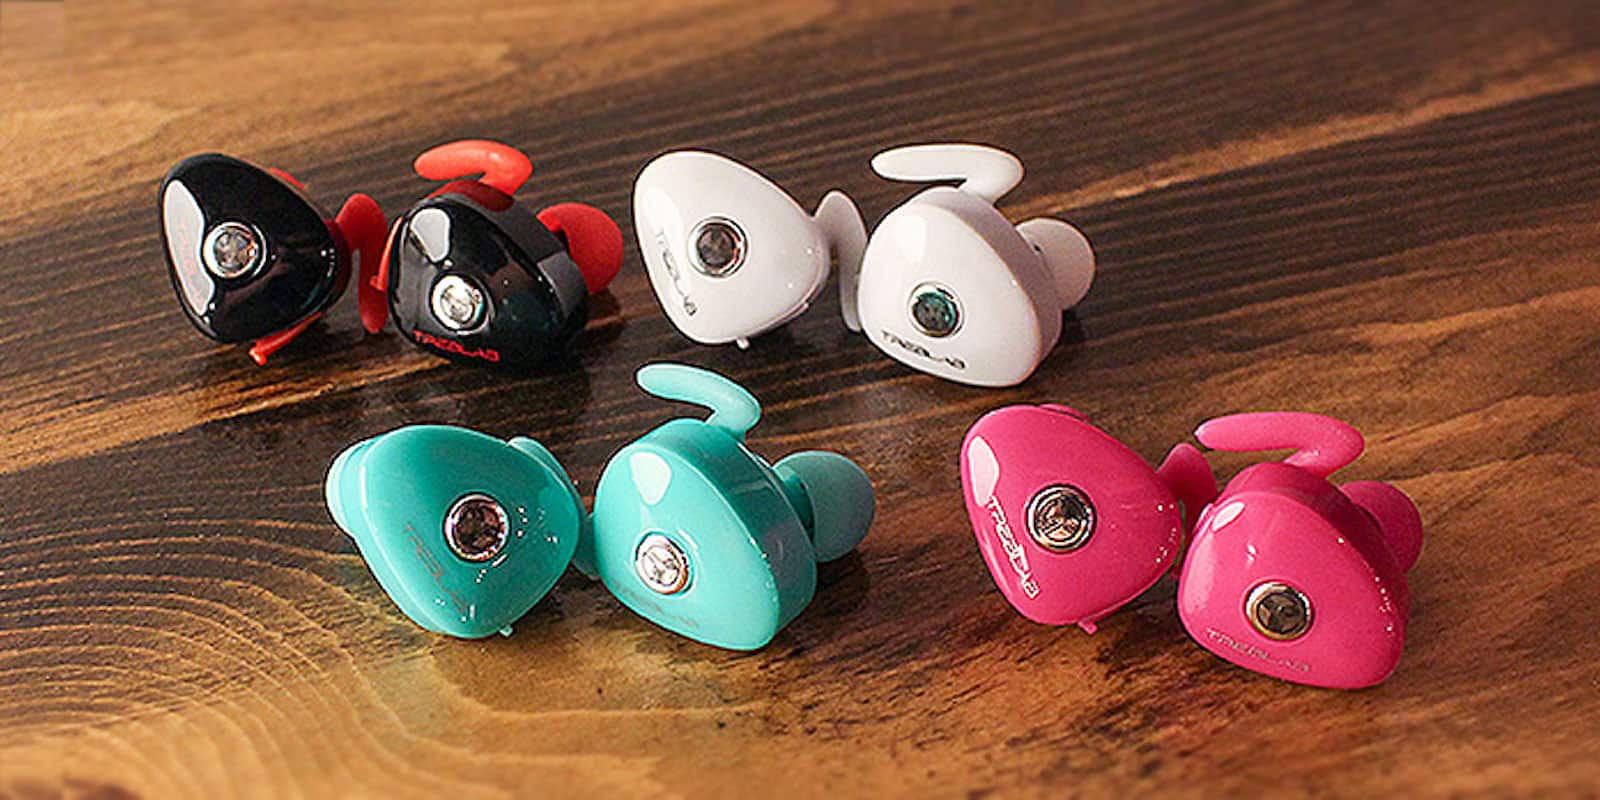 These futuristic Bluetooth earbuds feature great audio, battery life, and comfort.